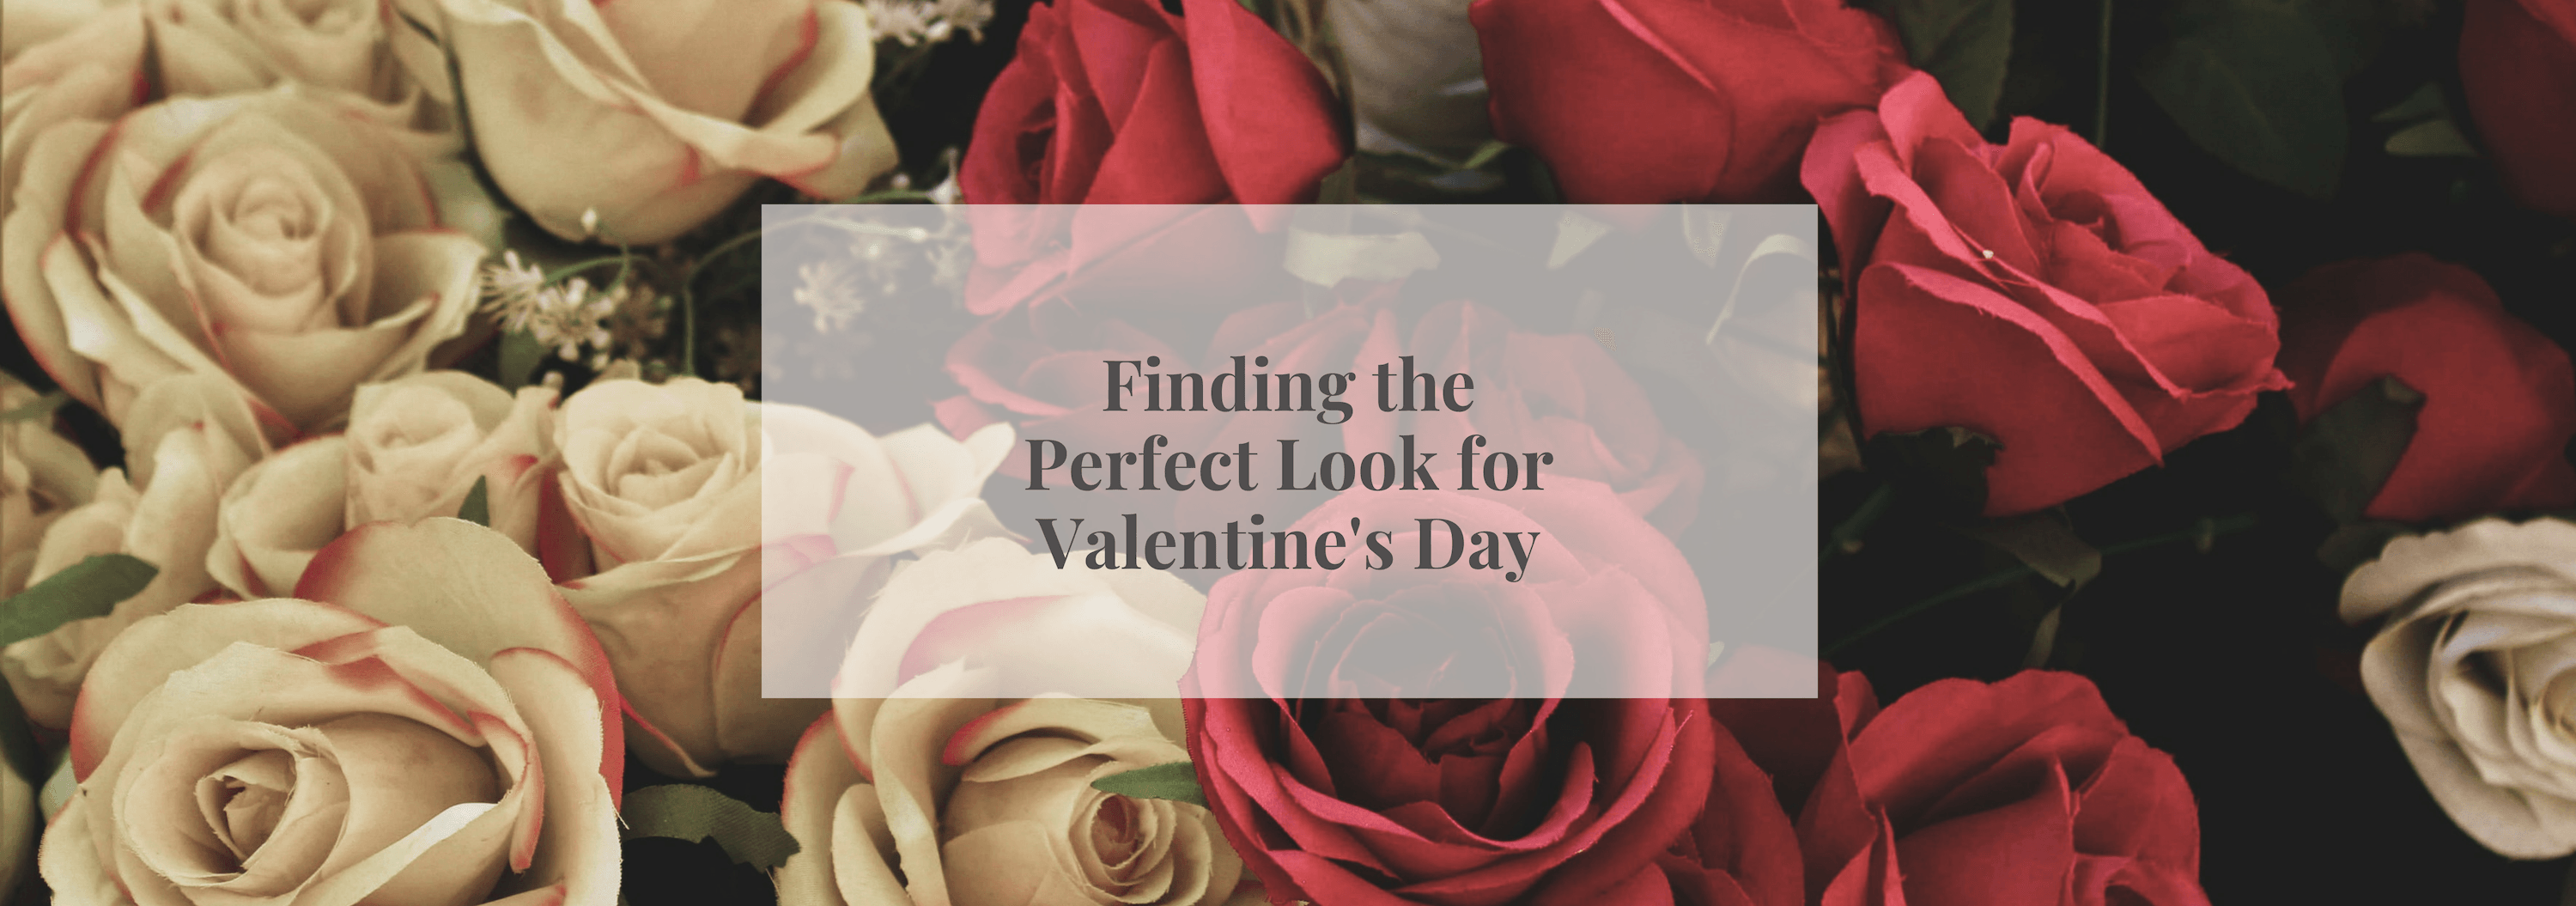 Finding the Perfect Look for Valentine's Day - Numi